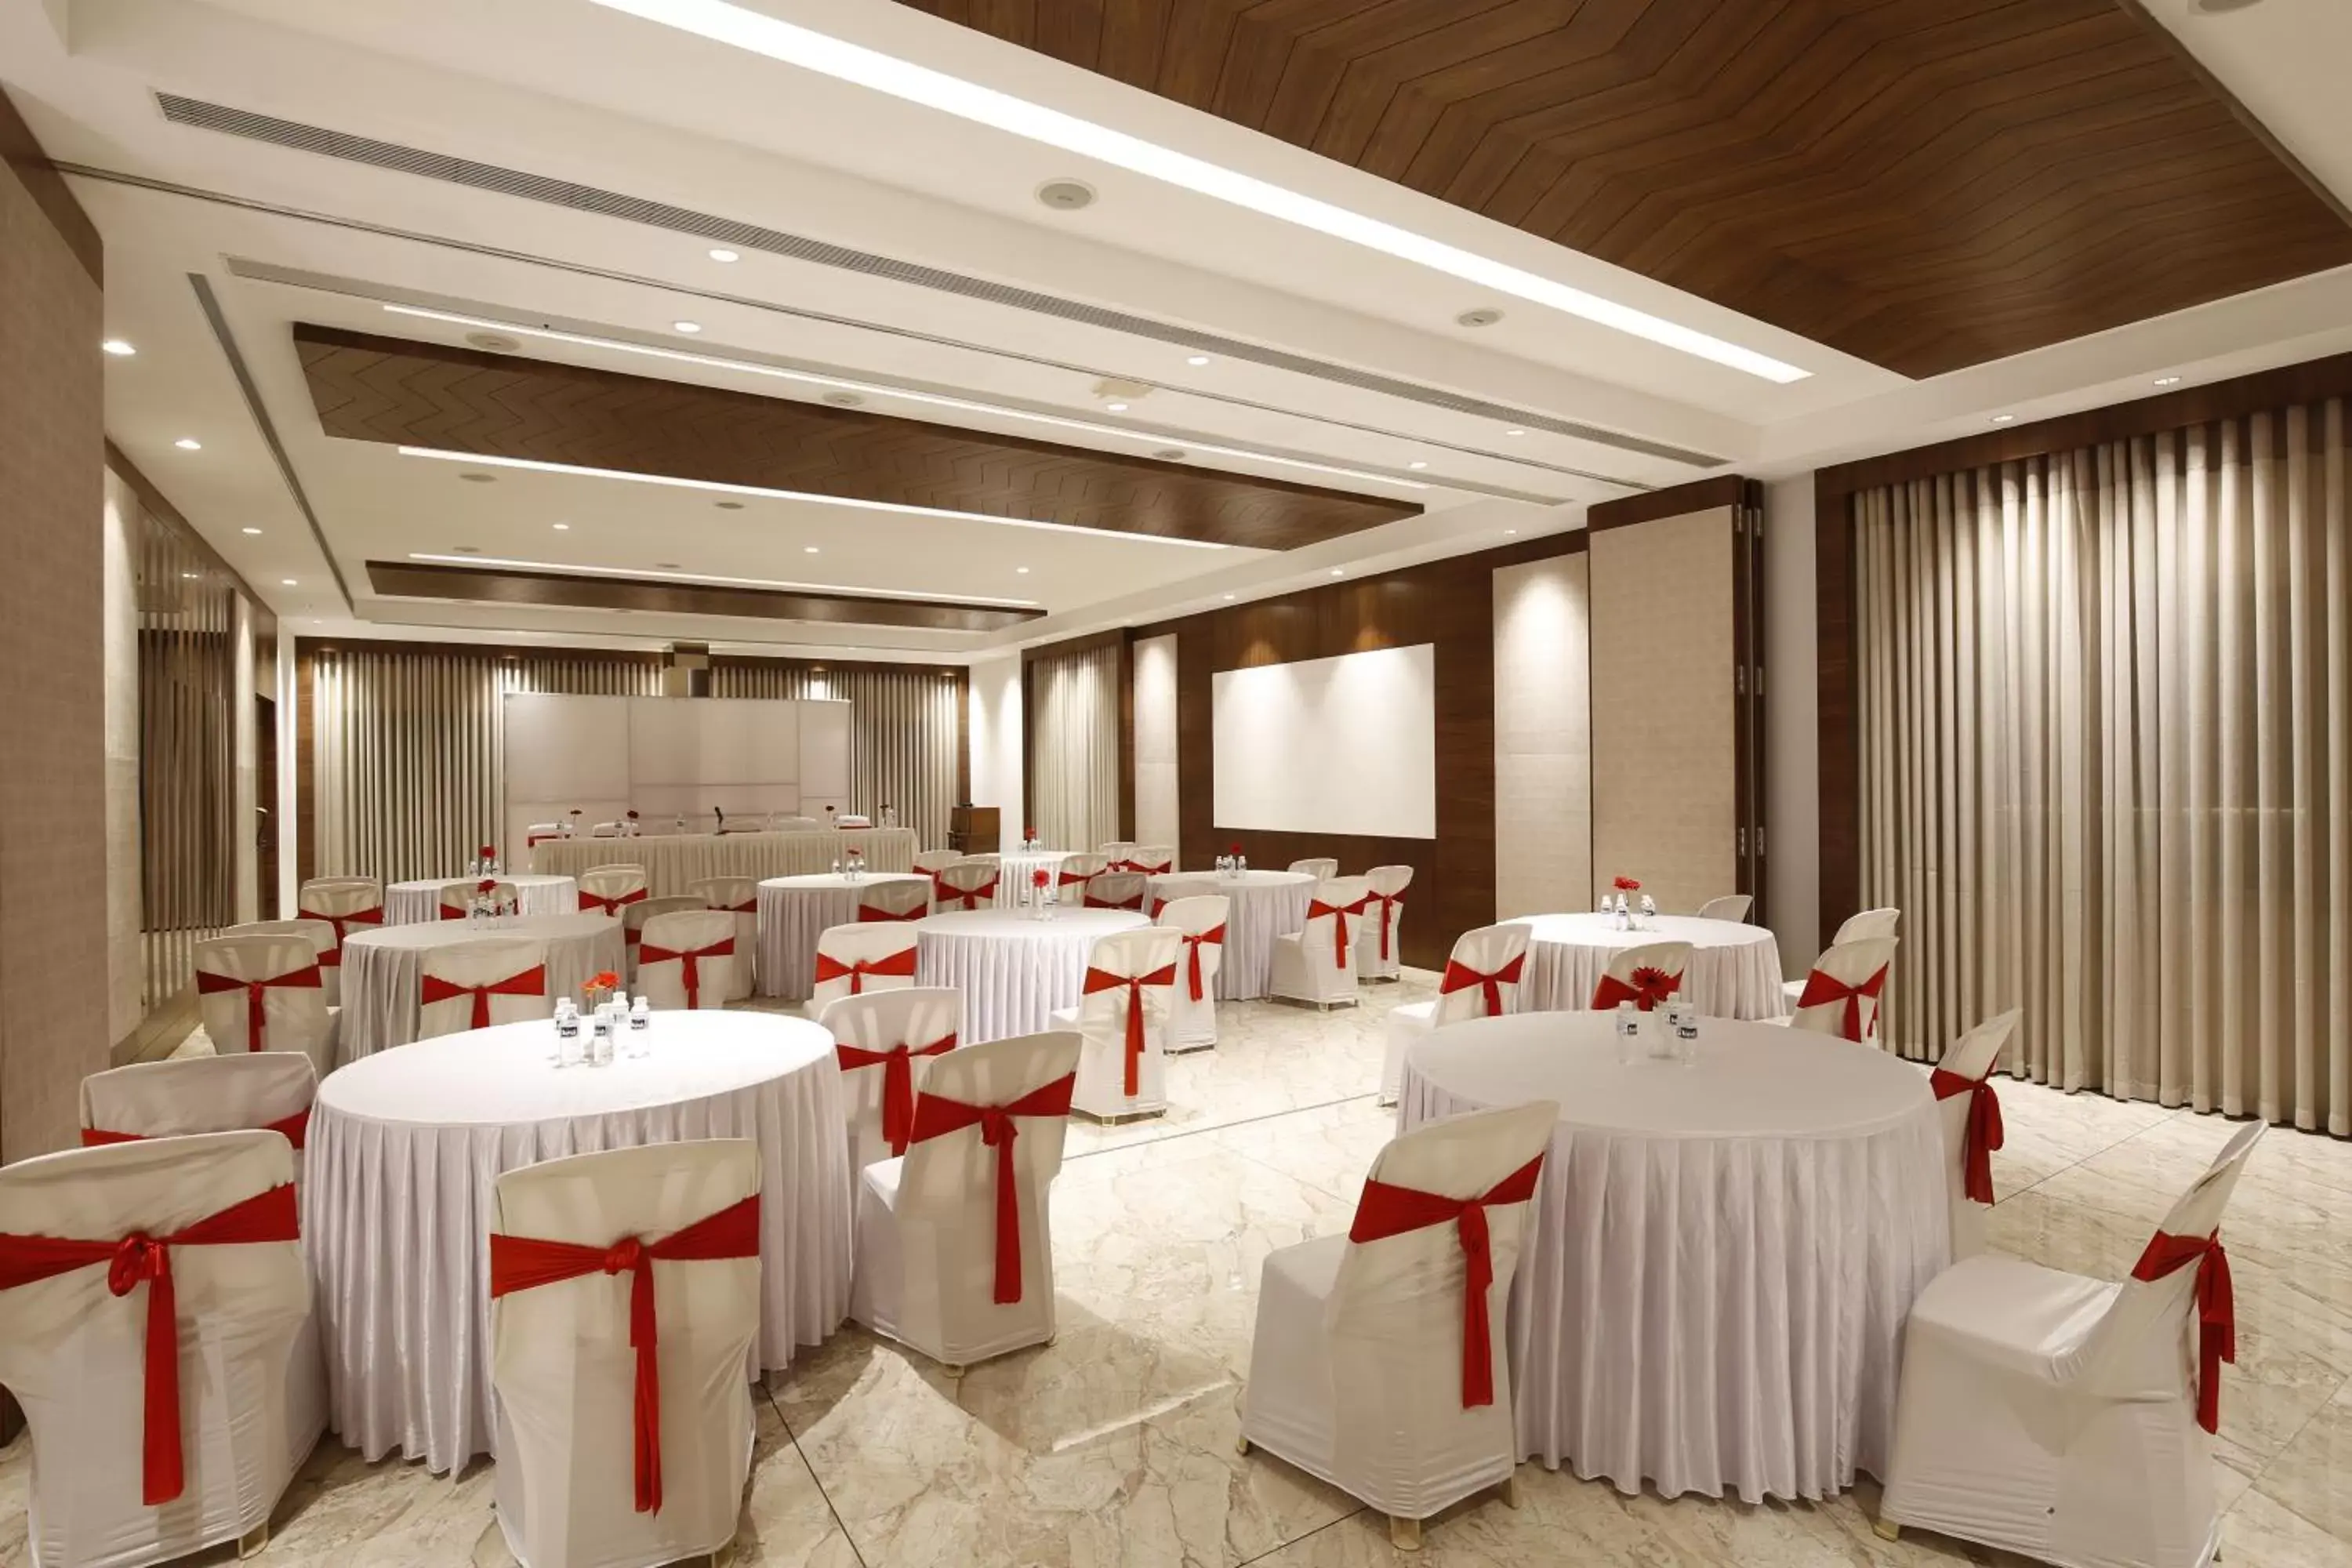 Banquet/Function facilities, Banquet Facilities in Ramee Panchshil